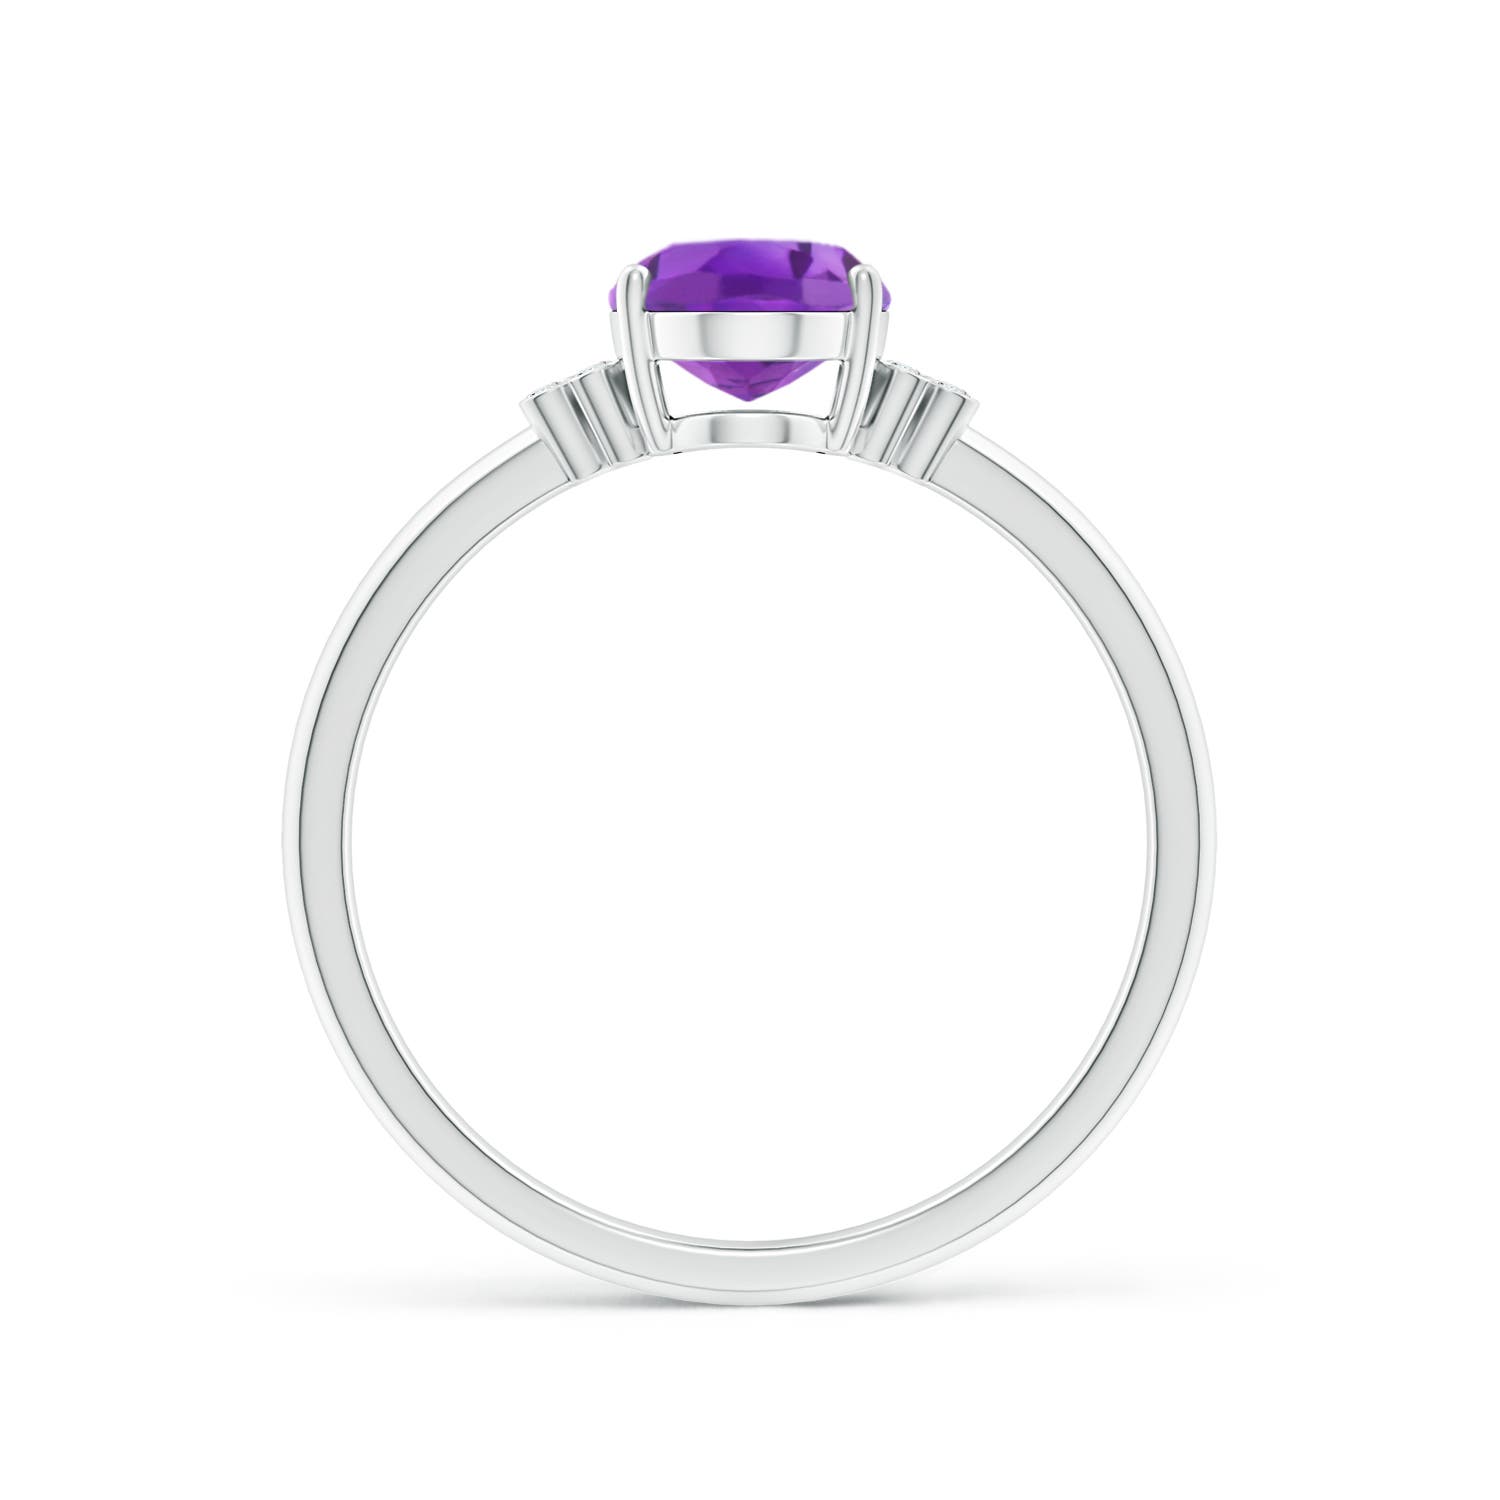 AA - Amethyst / 1.2 CT / 14 KT White Gold